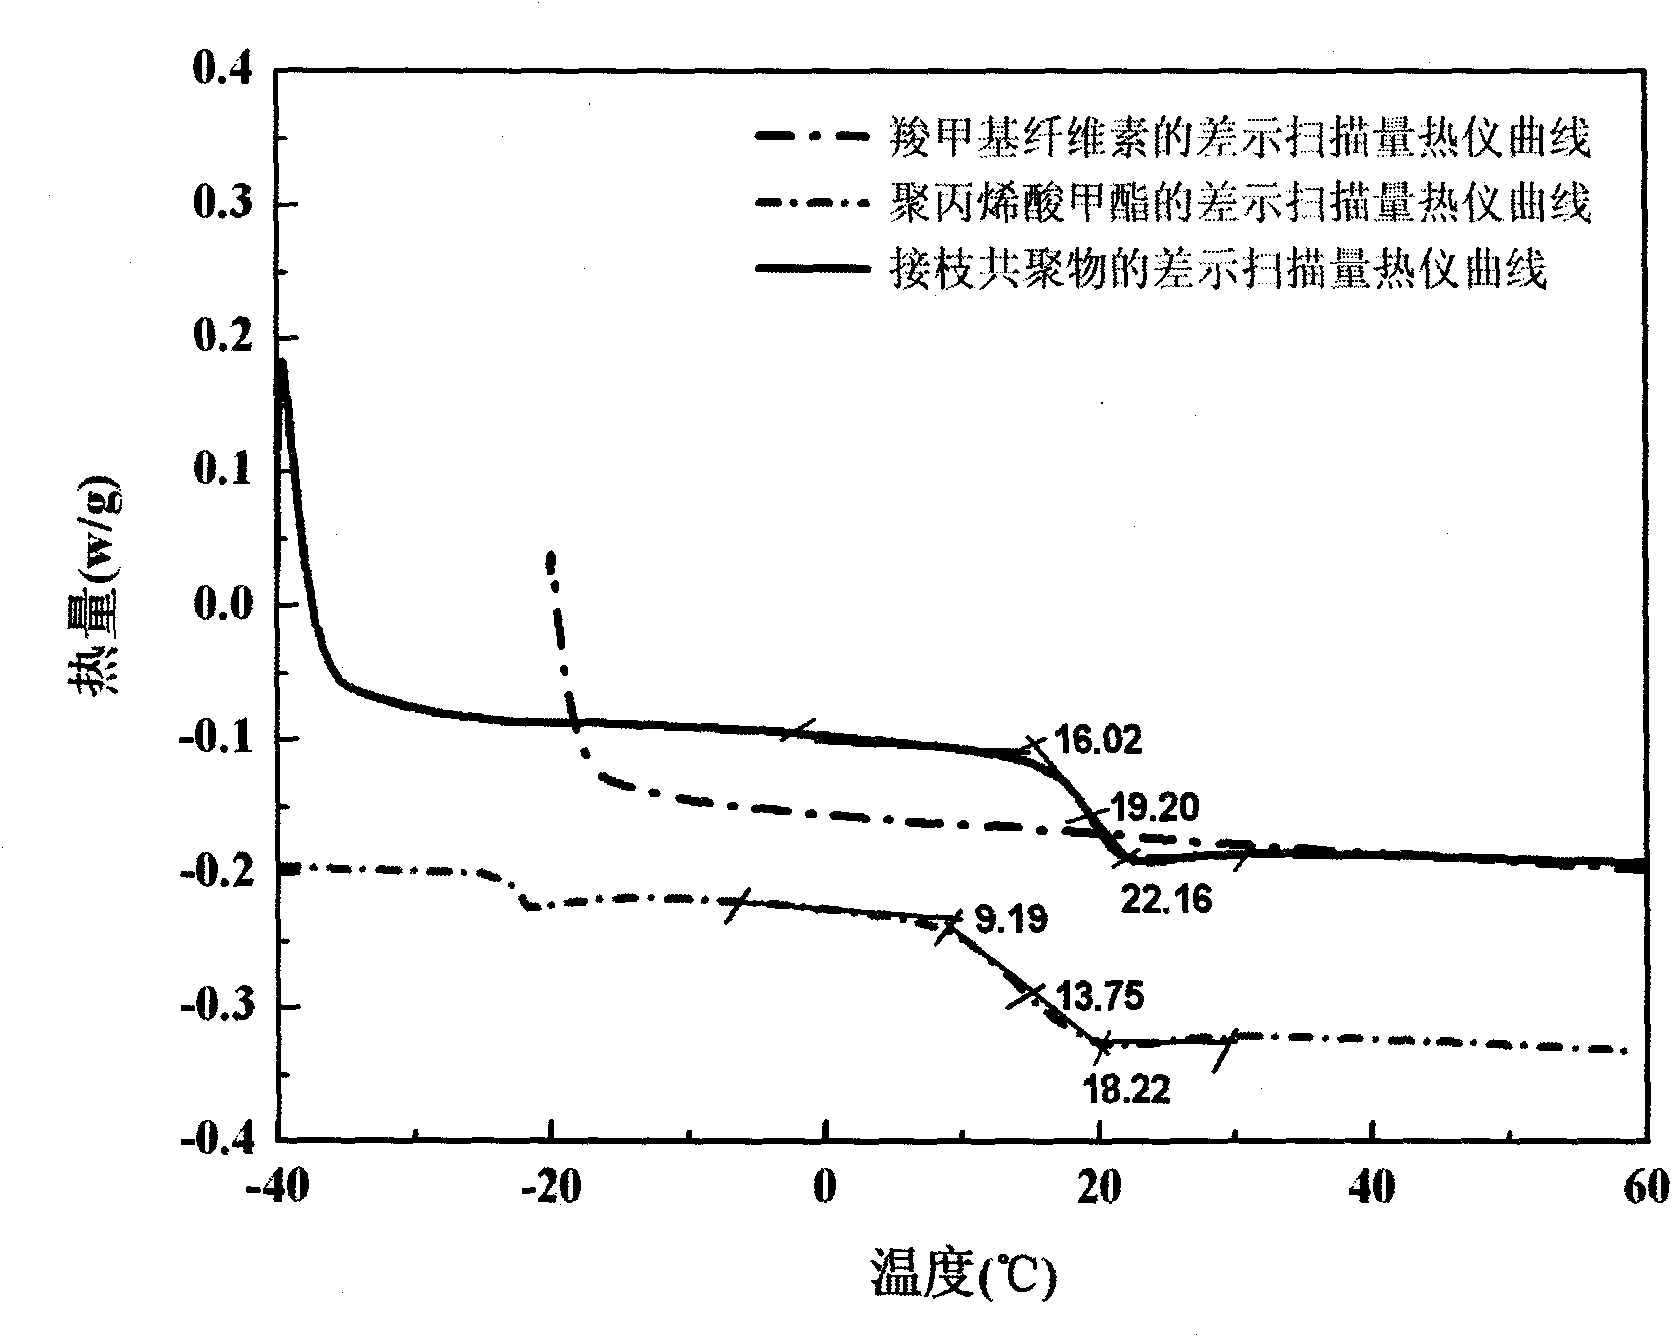 Method for preparing environment-friendly modified carboxymethyl cellulose thermoplastic material